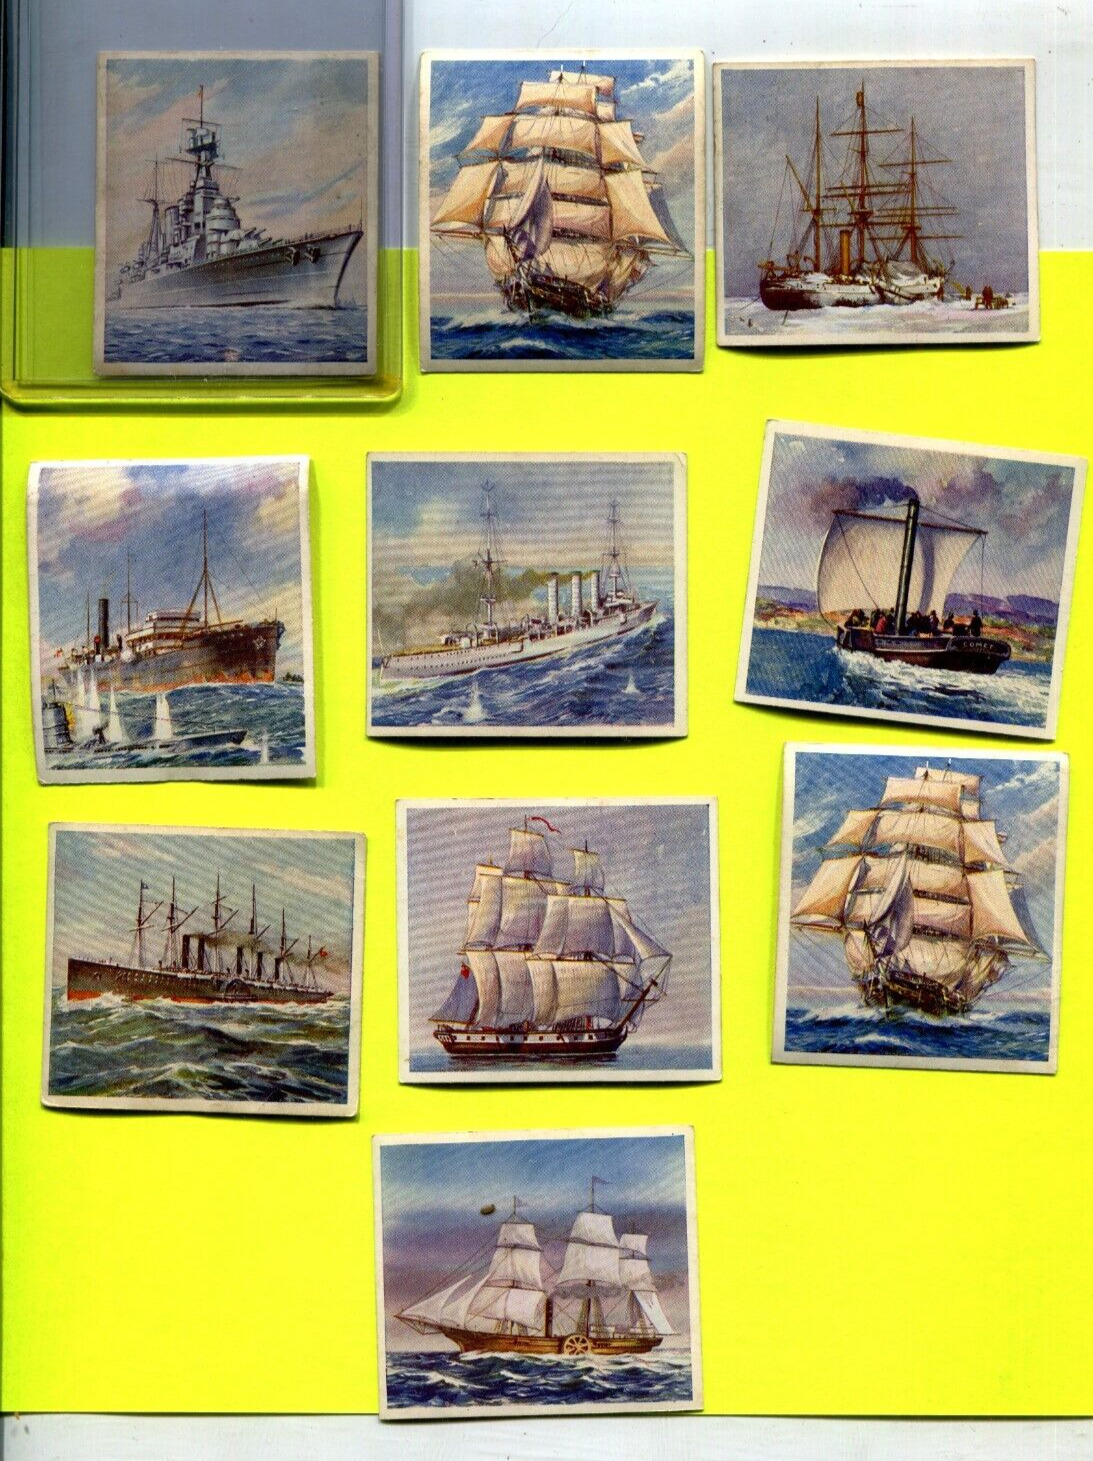 1938 GODFREY PHILLIPS CIGARETTES SHIPS THAT HAVE MADE HISTORY 10 TOBACCO CARDS